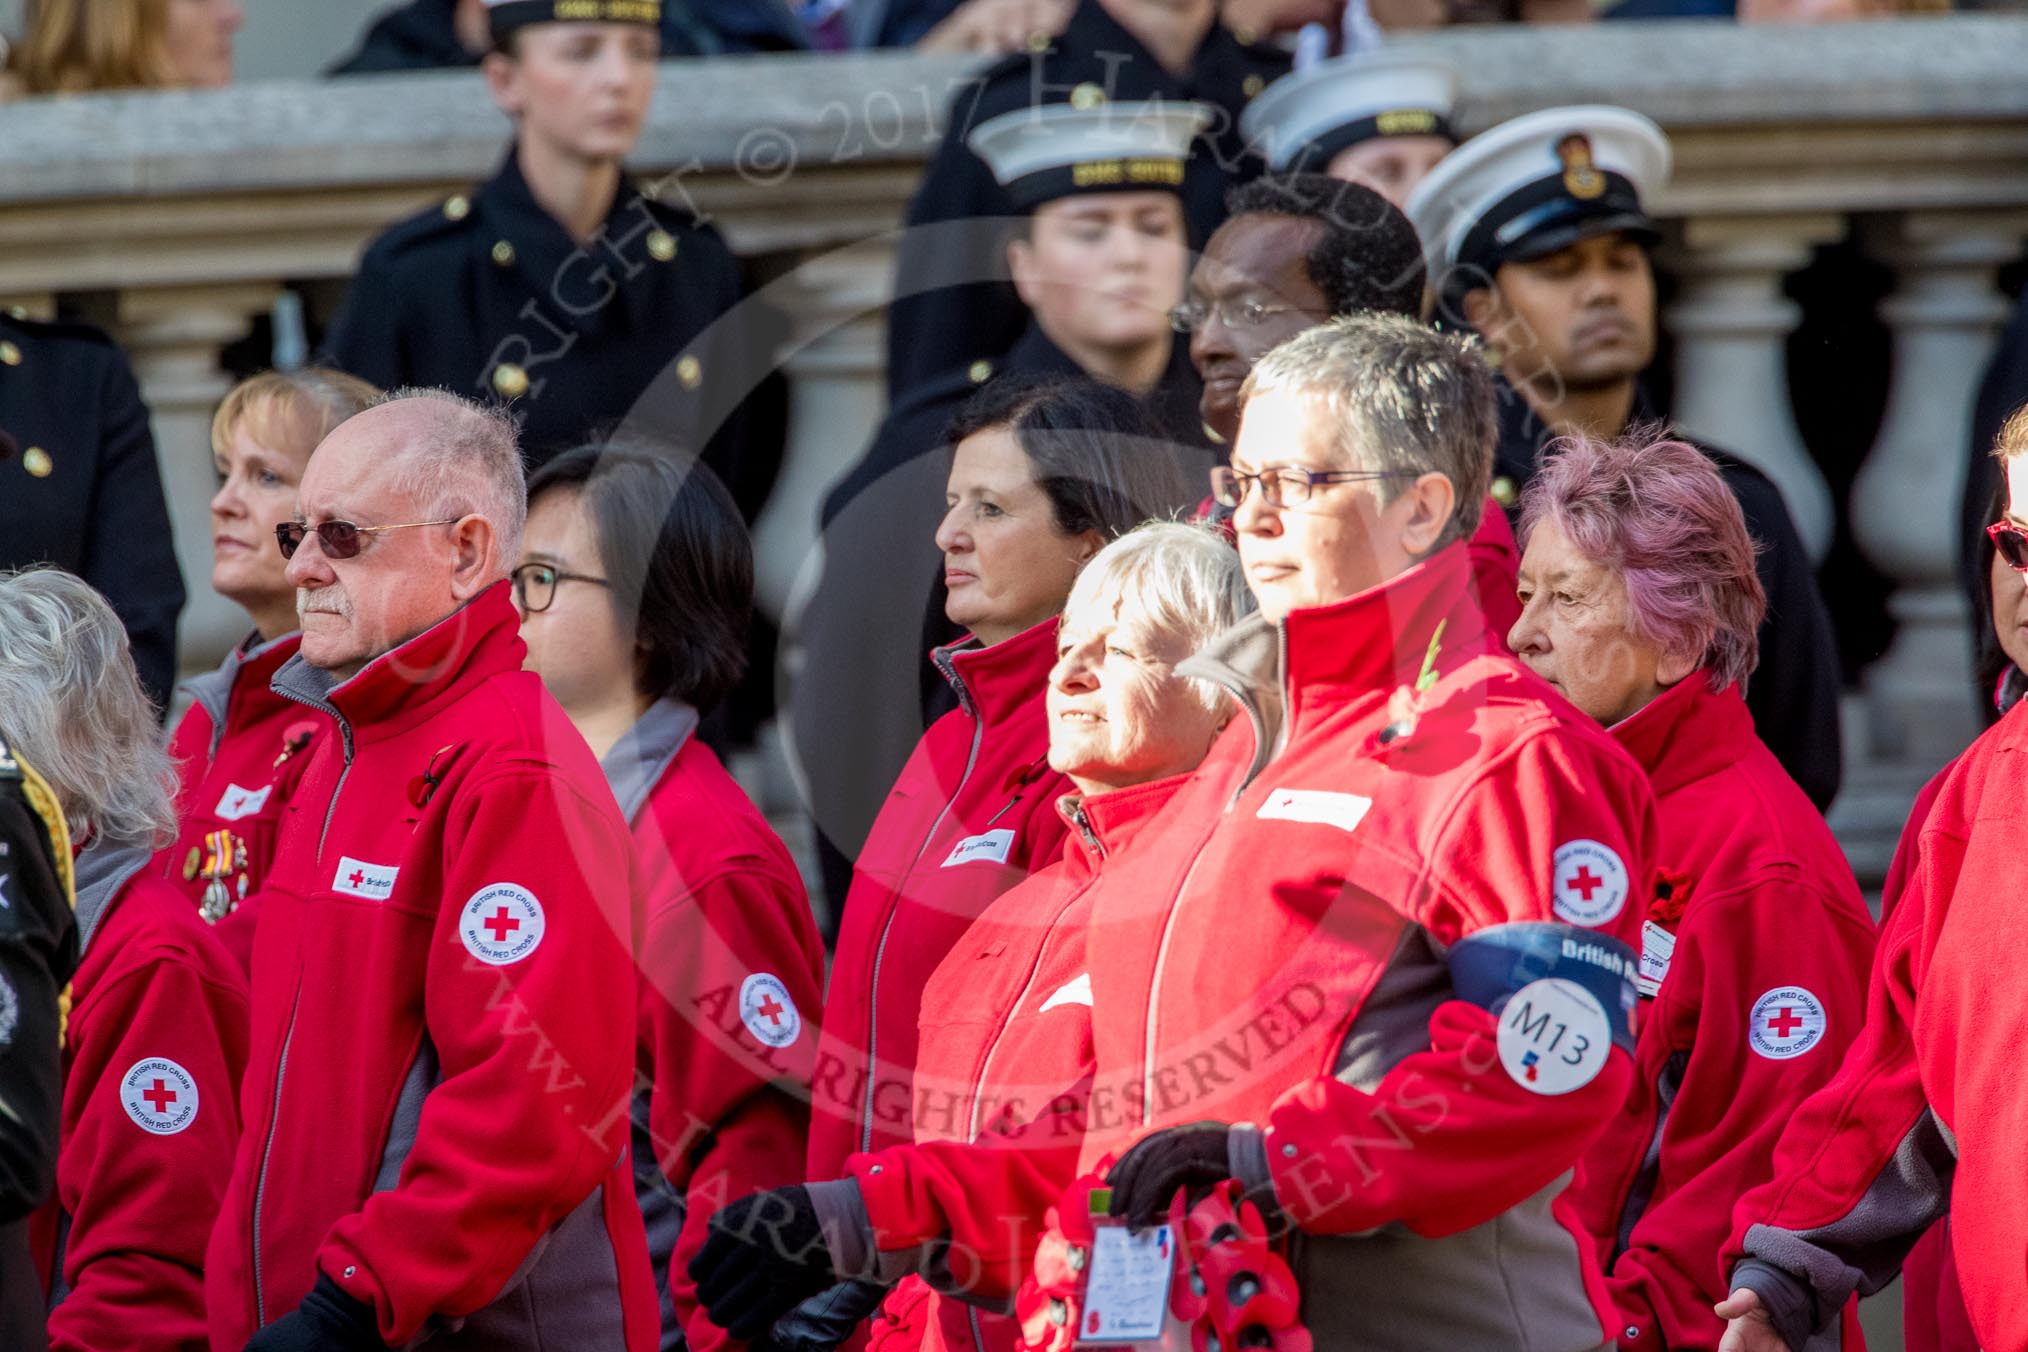 British Red Cross (Group M13, 15 members) during the Royal British Legion March Past on Remembrance Sunday at the Cenotaph, Whitehall, Westminster, London, 11 November 2018, 12:26.